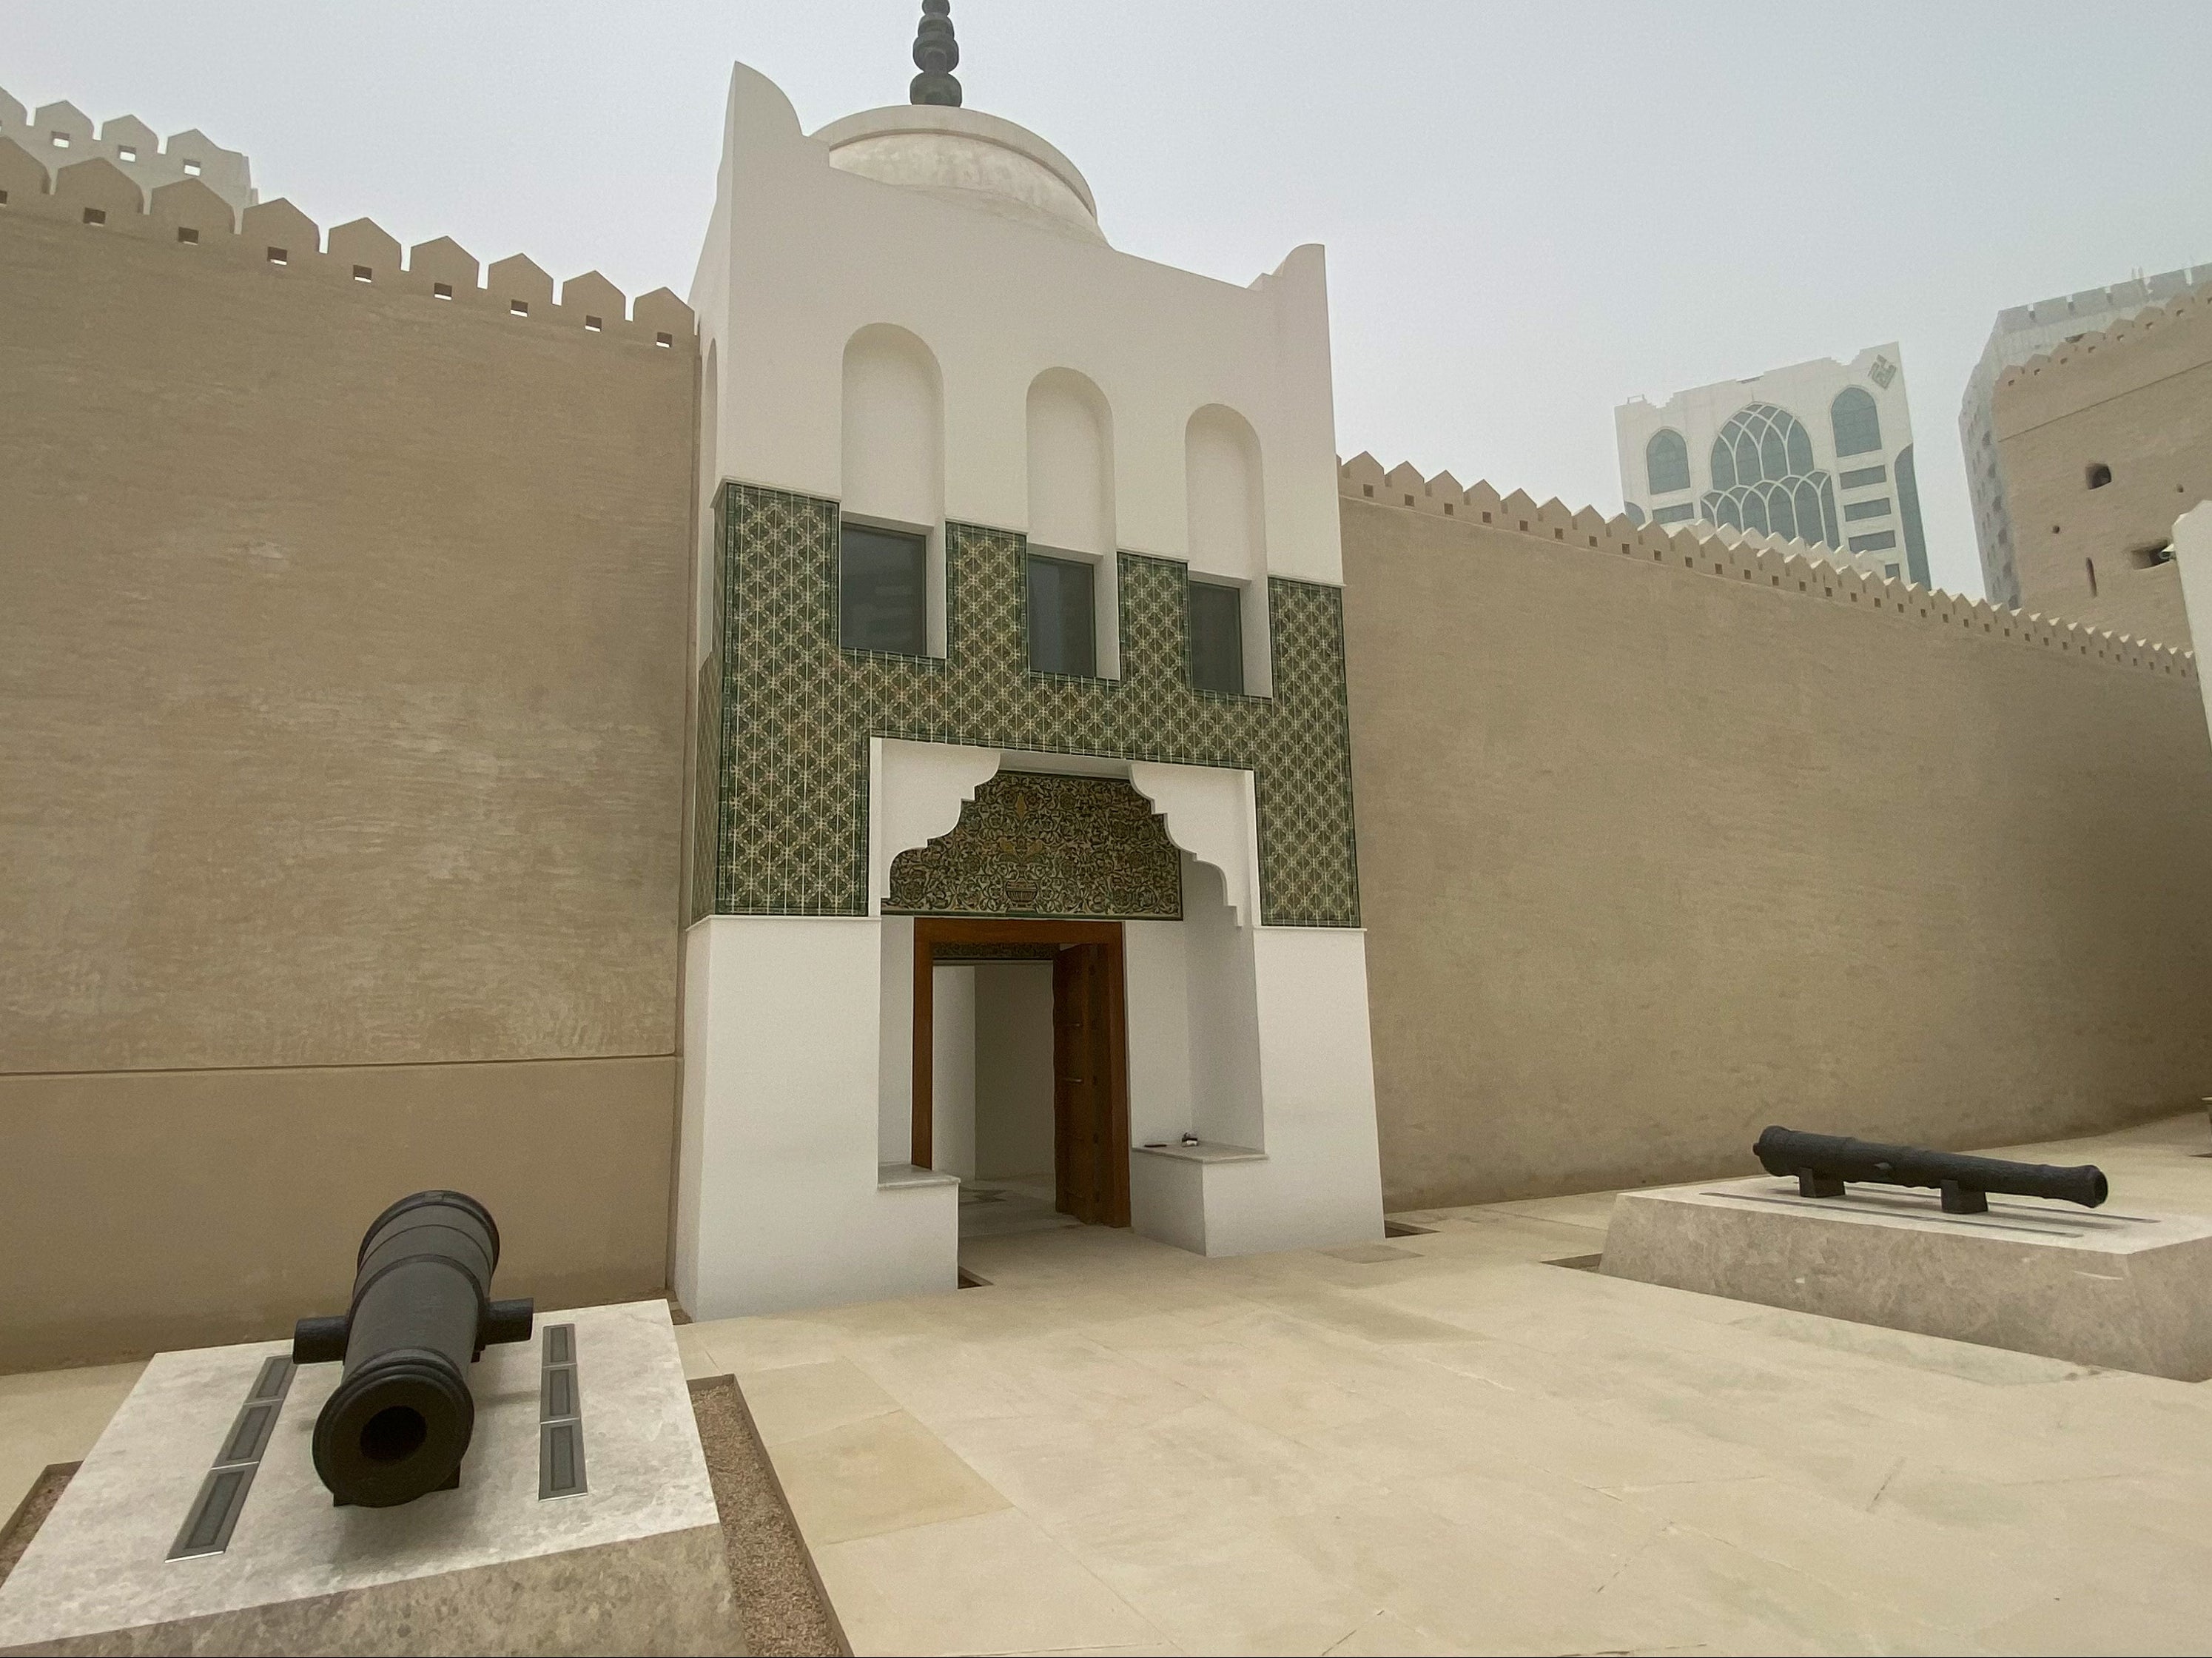 <p>The Qasr Al-Hosn is the oldest stone building in the UAE </p>